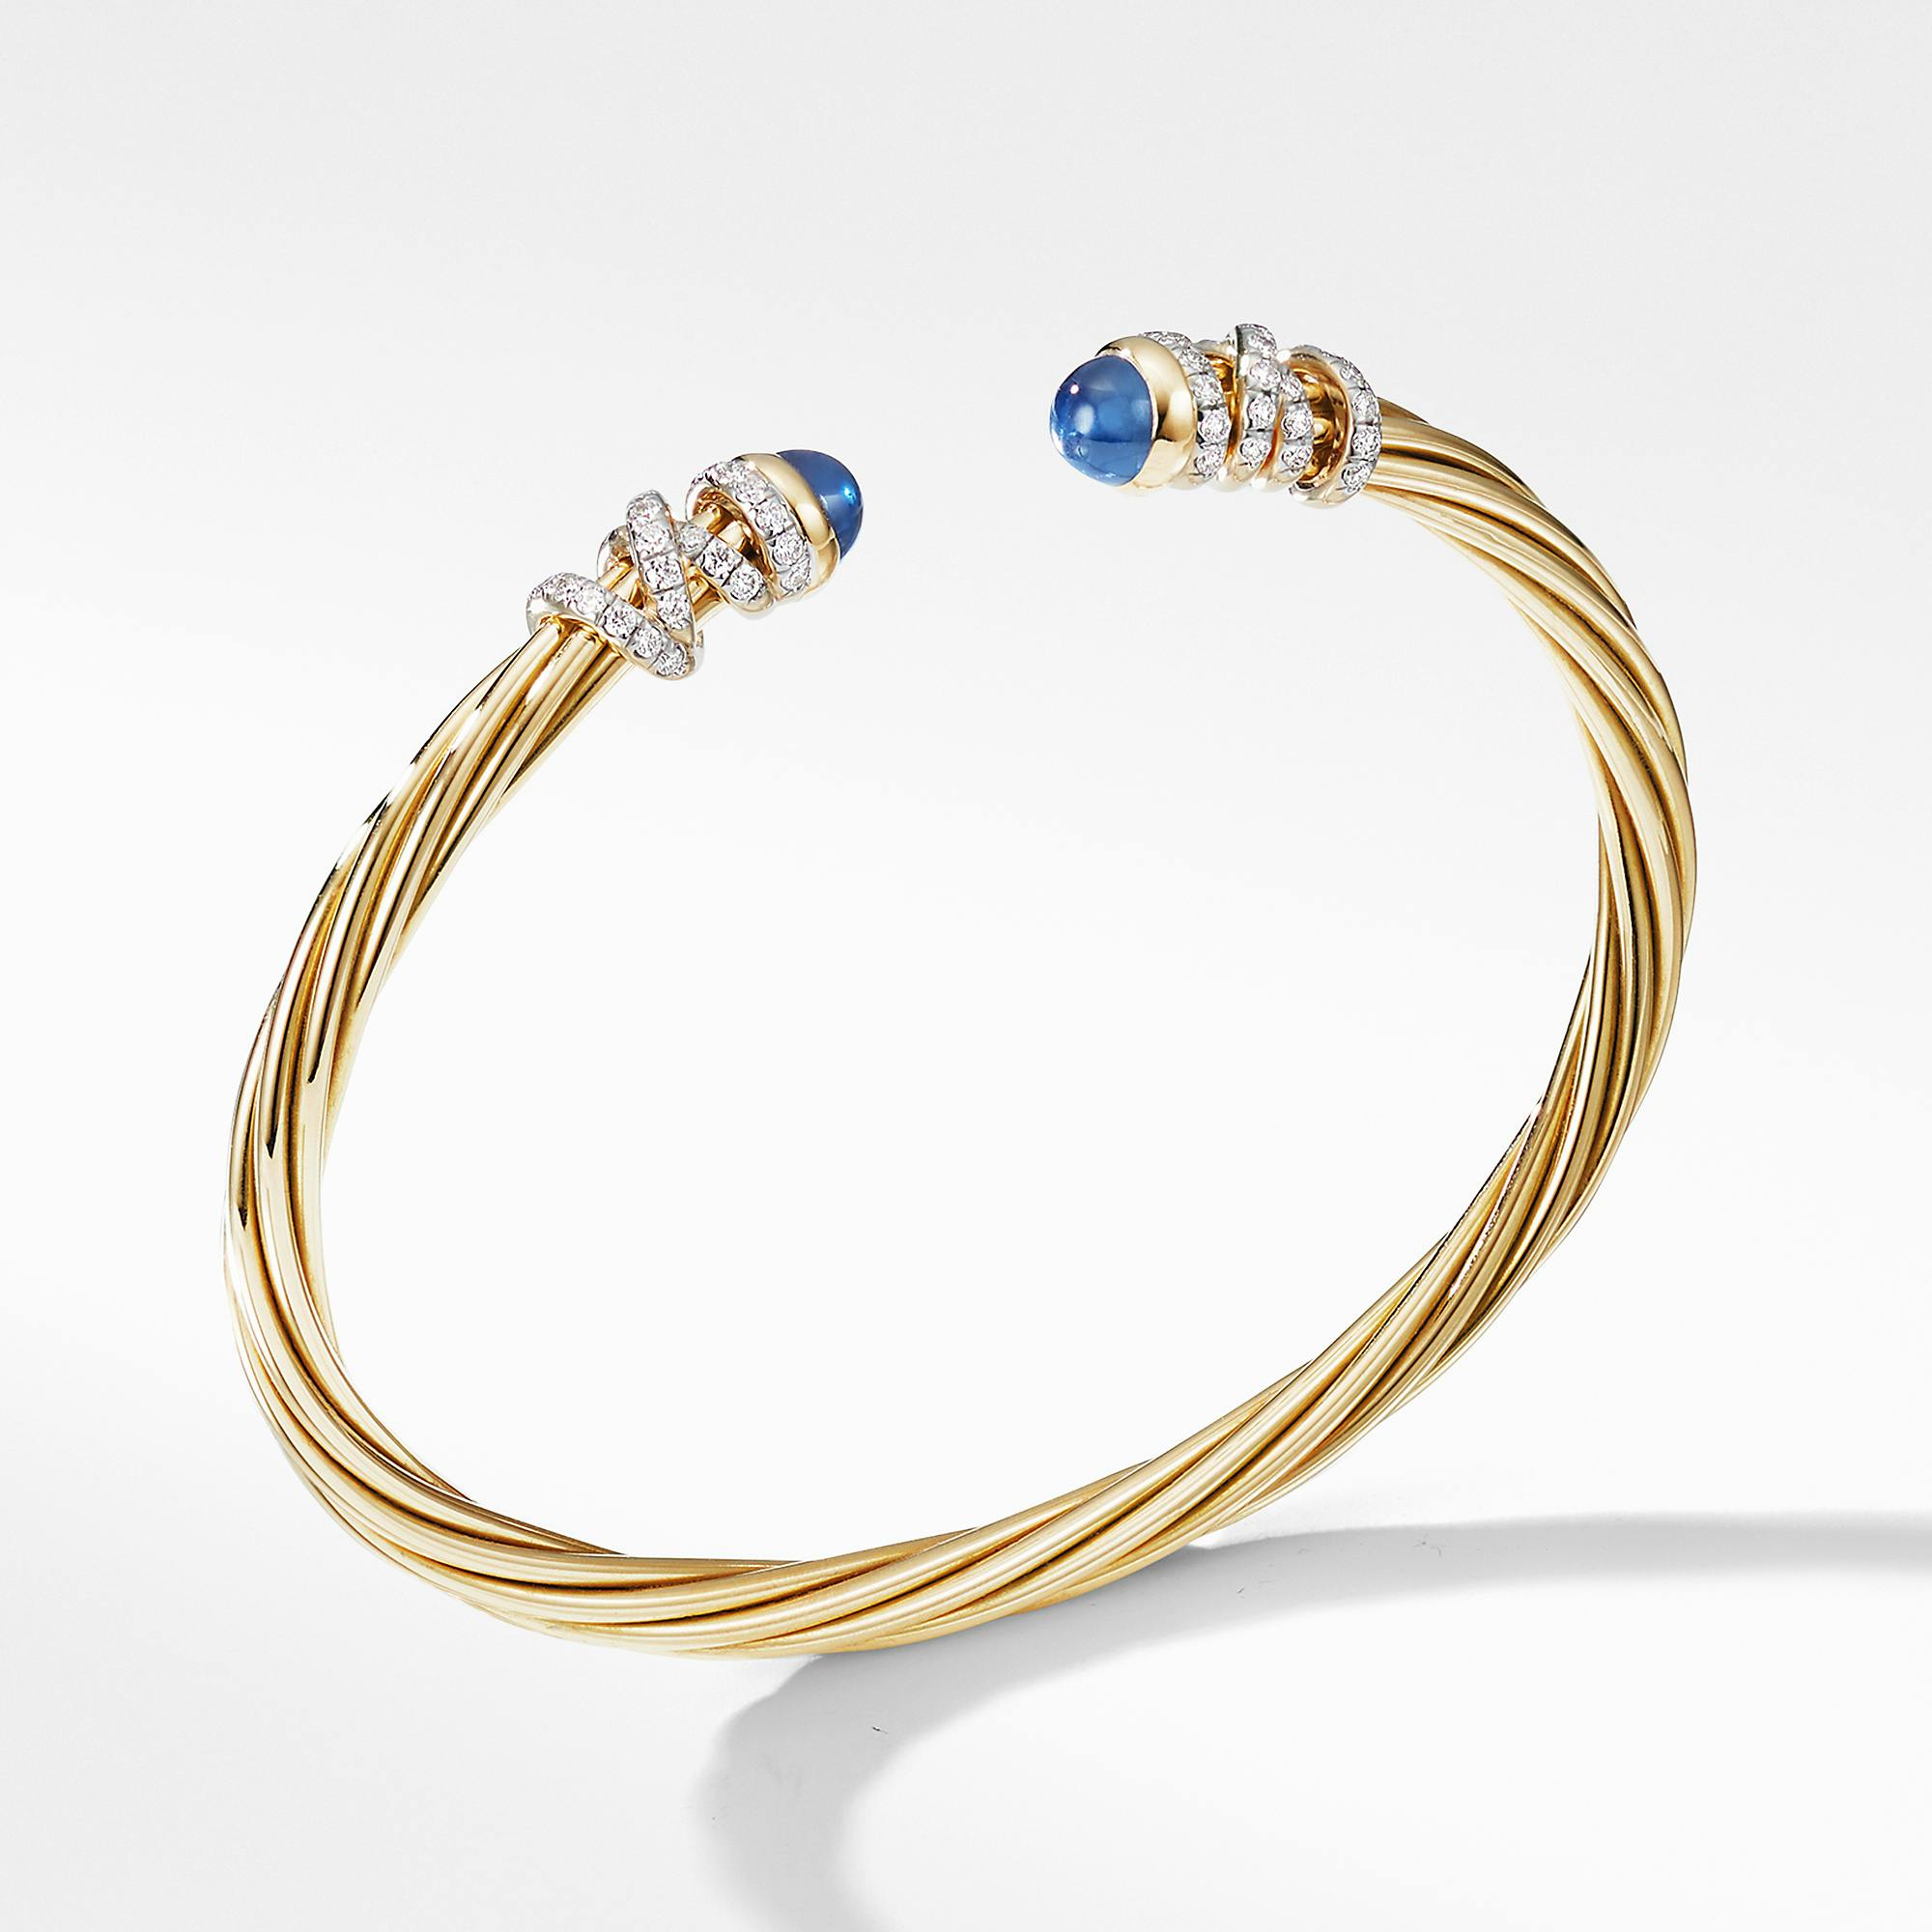 David Yurman Helena End Station Bracelet in 18K Yellow Gold with Blue Sapphires and Diamonds